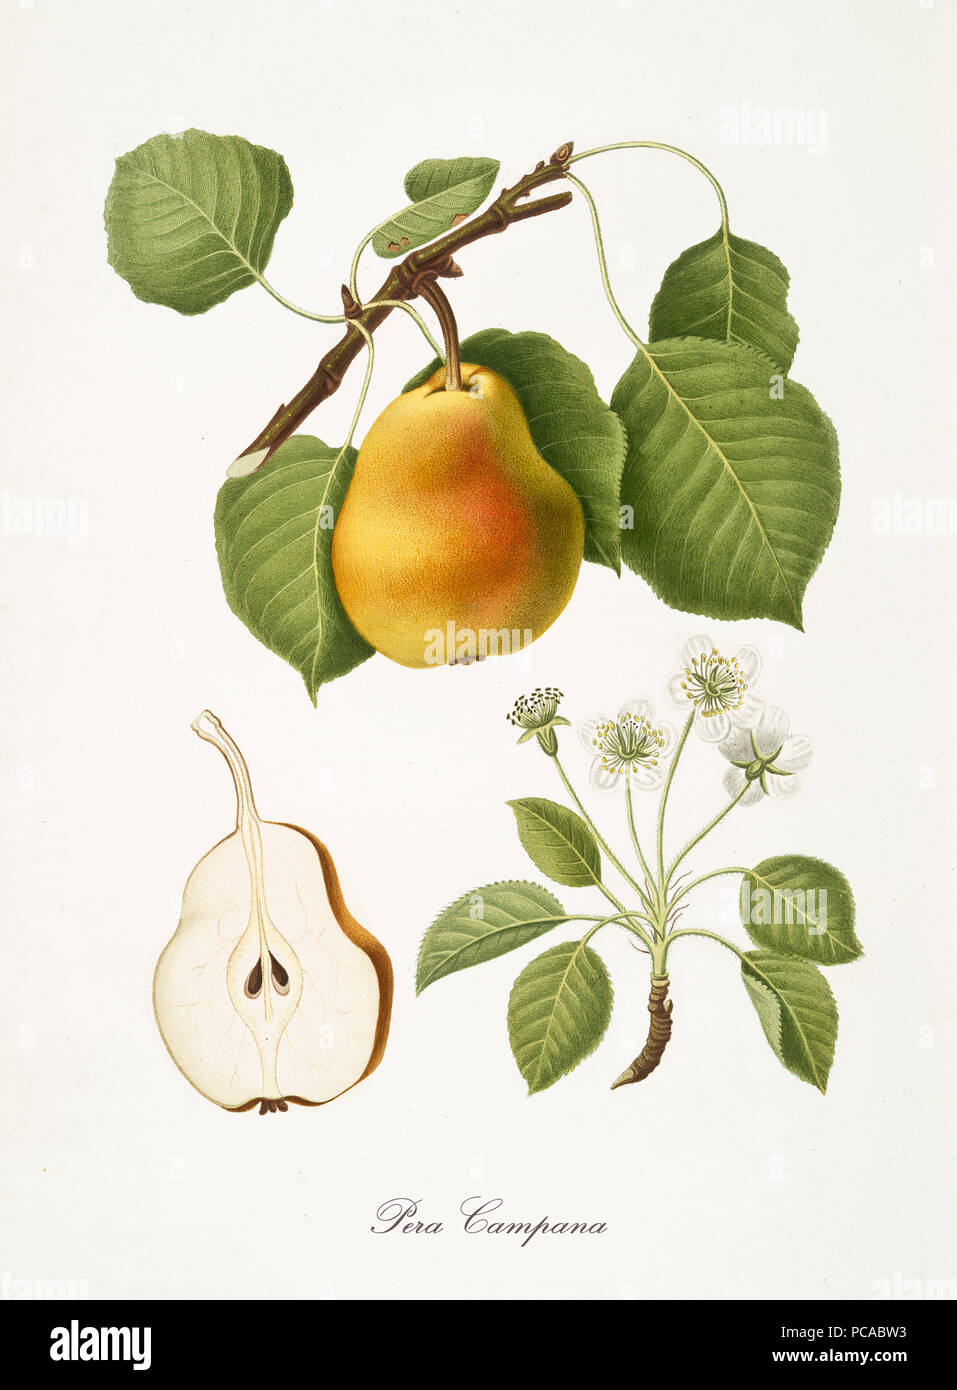 Pear, also known as campana pear, pear tree leaves, fruit section and flowers isolated on white background. Old botanical detailed illustration by Giorgio Gallesio publ. 1817, 1839 Pisa Italy Stock Photo